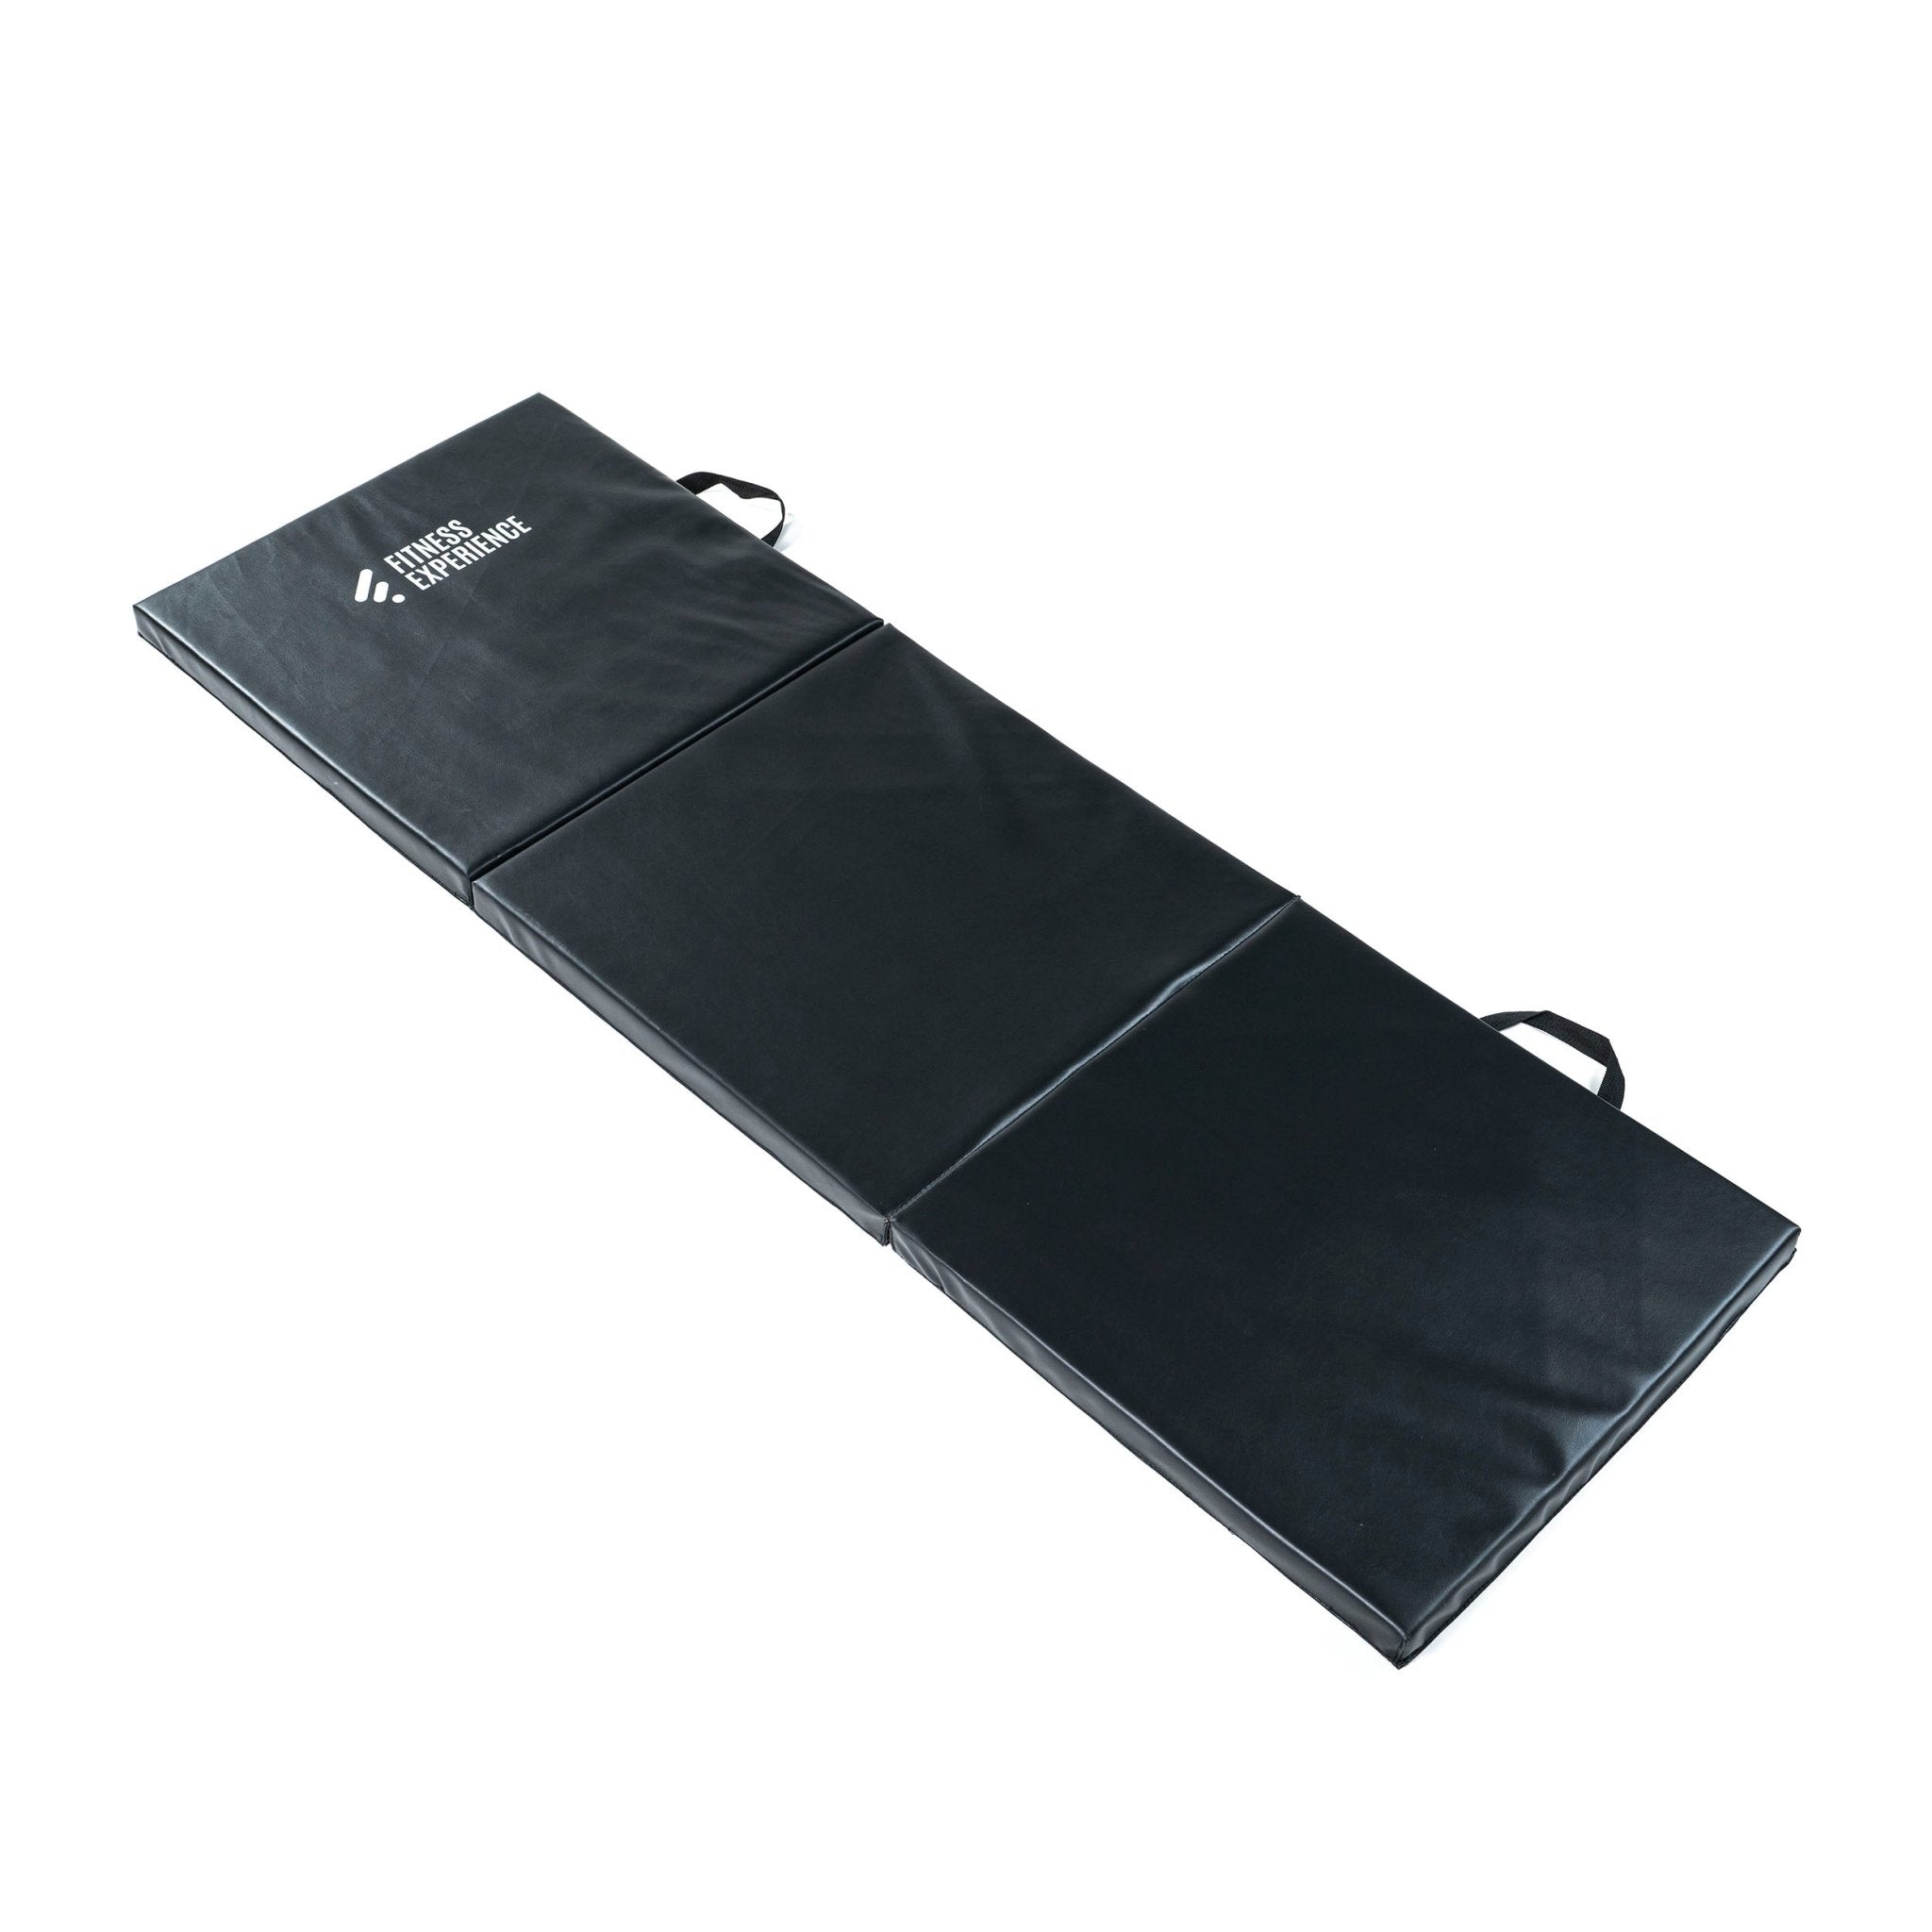 Folding Exercise Mat - 71 x 24 - Fitness Experience Commercial